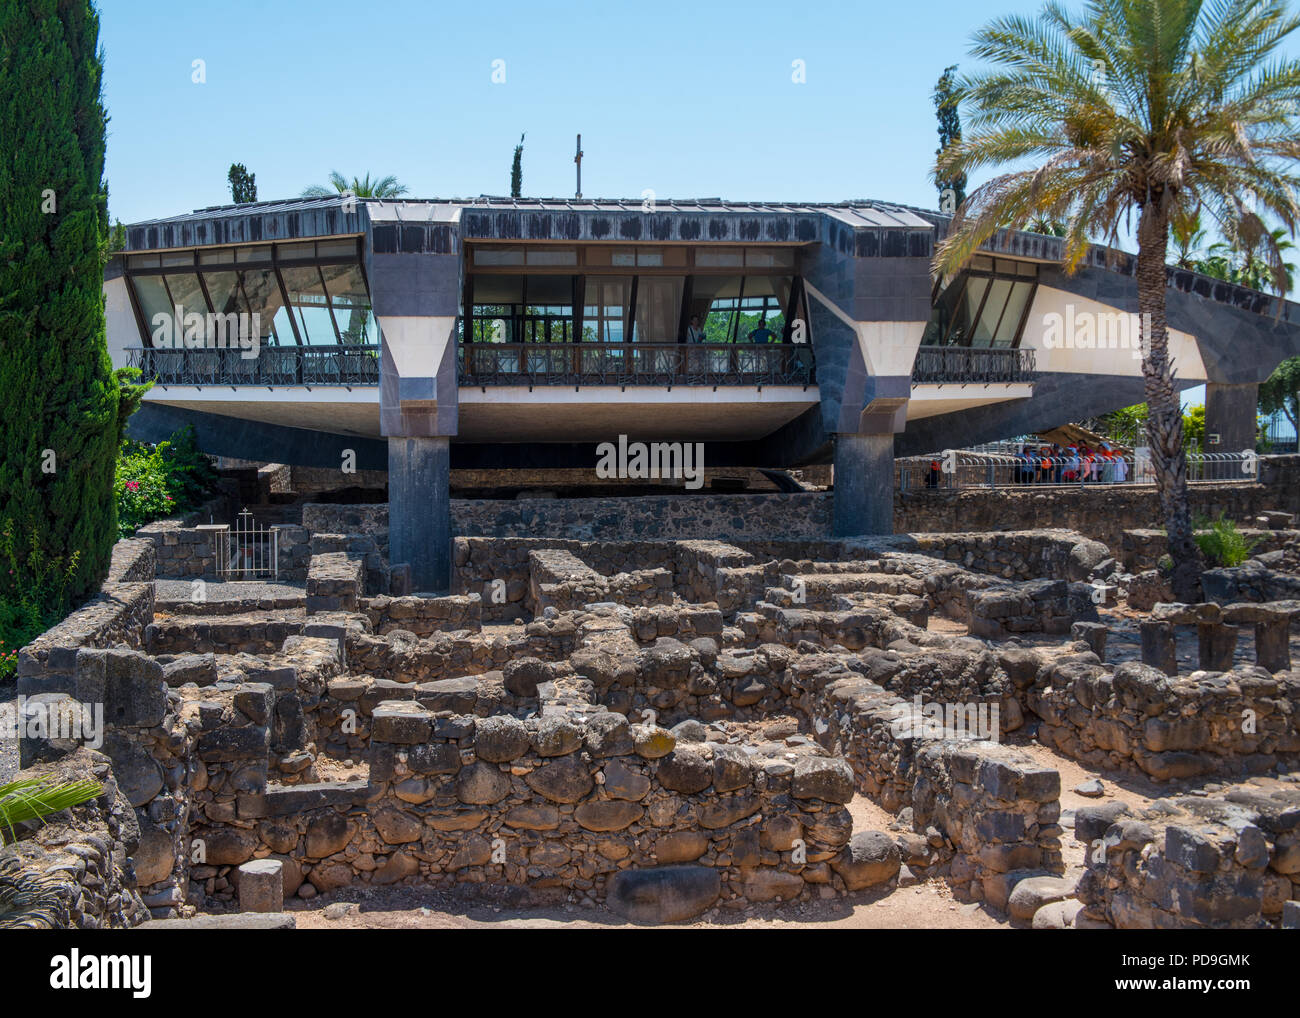 Capernaum, Israel   May 18  2018:Modern church over the  ruins of the dark basalt rock village of Capernaum, on the shore of the Sea of Galilee, where Stock Photo